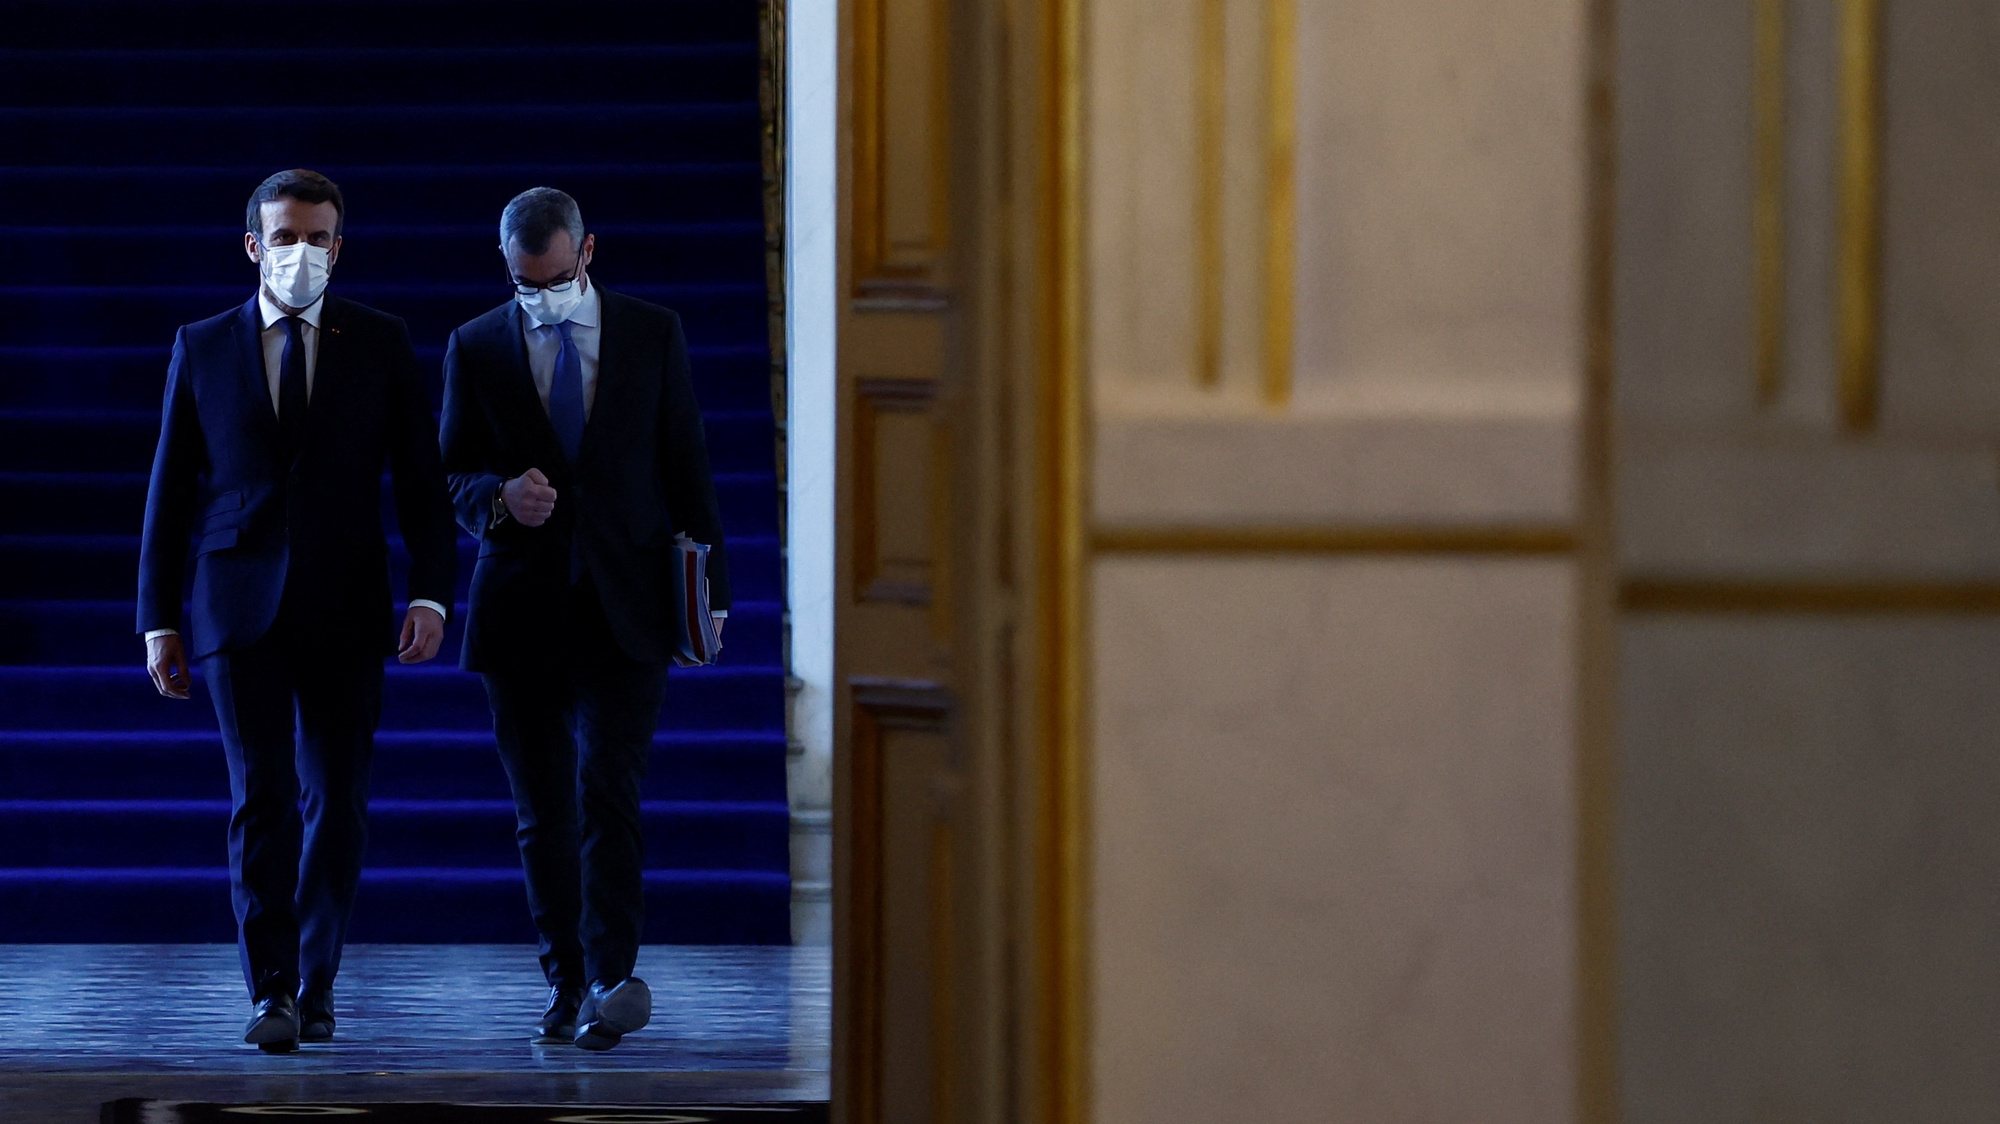 epa09787169 French President Emmanuel Macron and Secretary General of the Elysee Palace Alexis Kohler arrive for a Defense Council meeting on the Russian-Ukrainian crisis, at the Elysee Palace in Paris, France, 26 February 2022.  EPA/CHRISTIAN HARTMANN / POOL  MAXPPP OUT